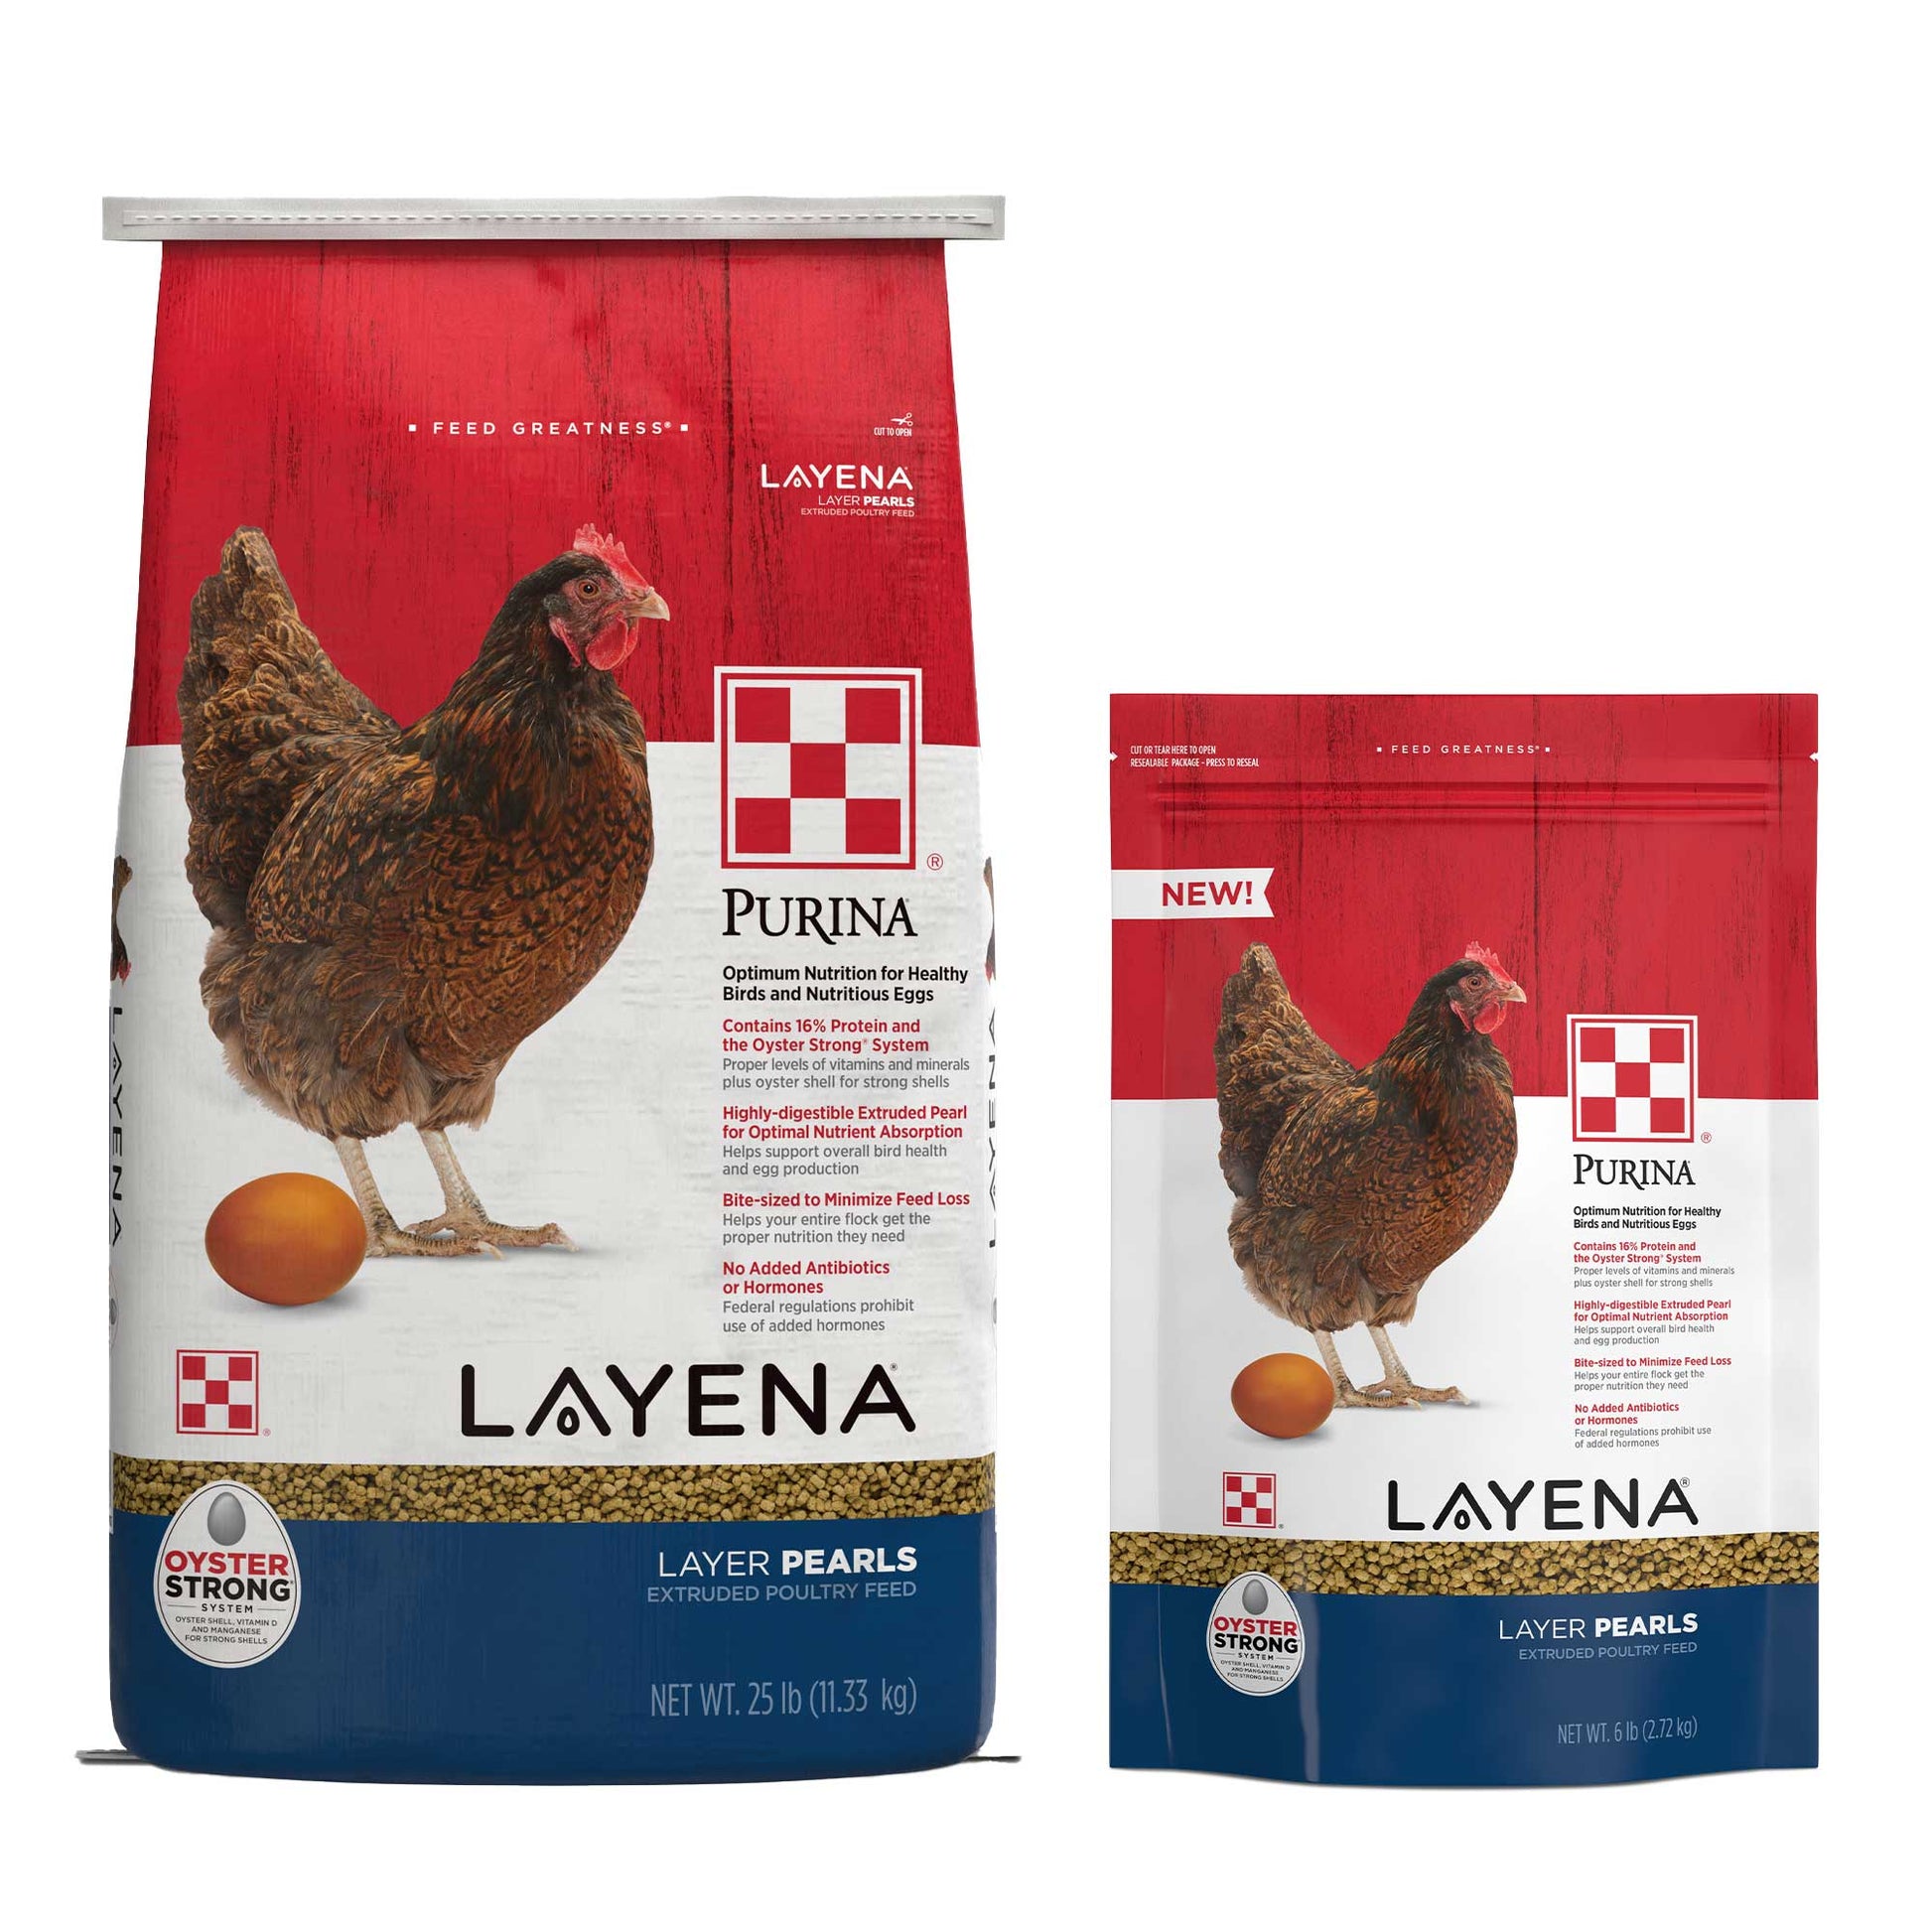 Purina Layena Pearls 25 Pound and 6 Pound grouped together